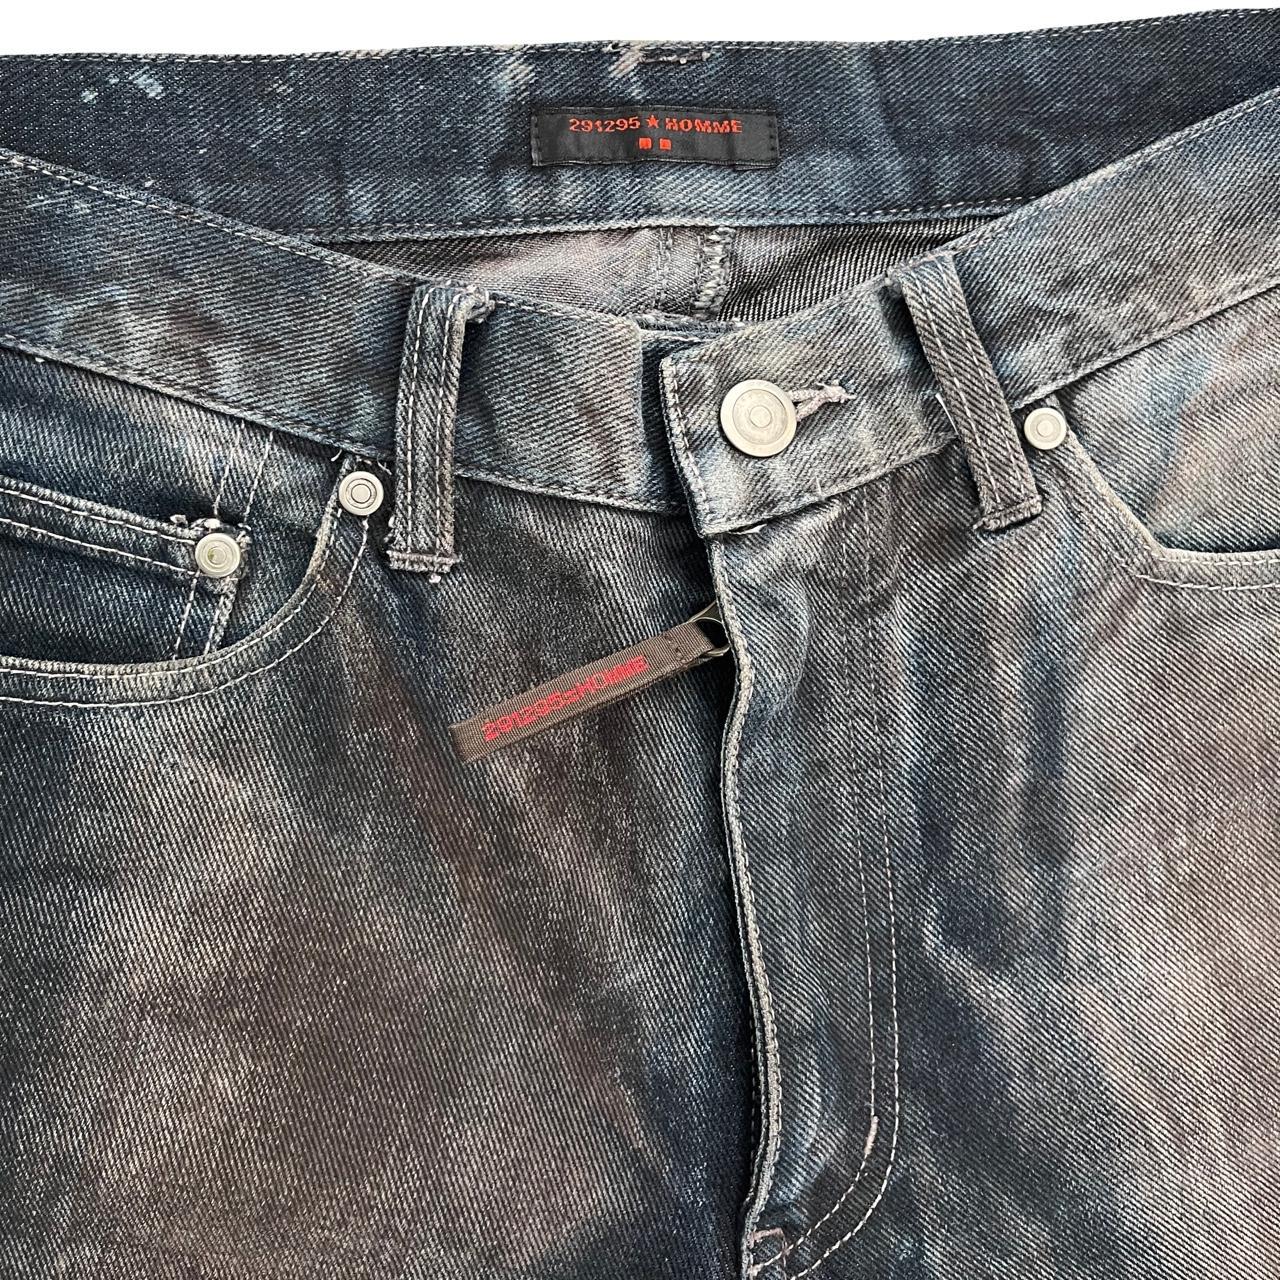 291295 = Homme Jeans – The Holy Grail